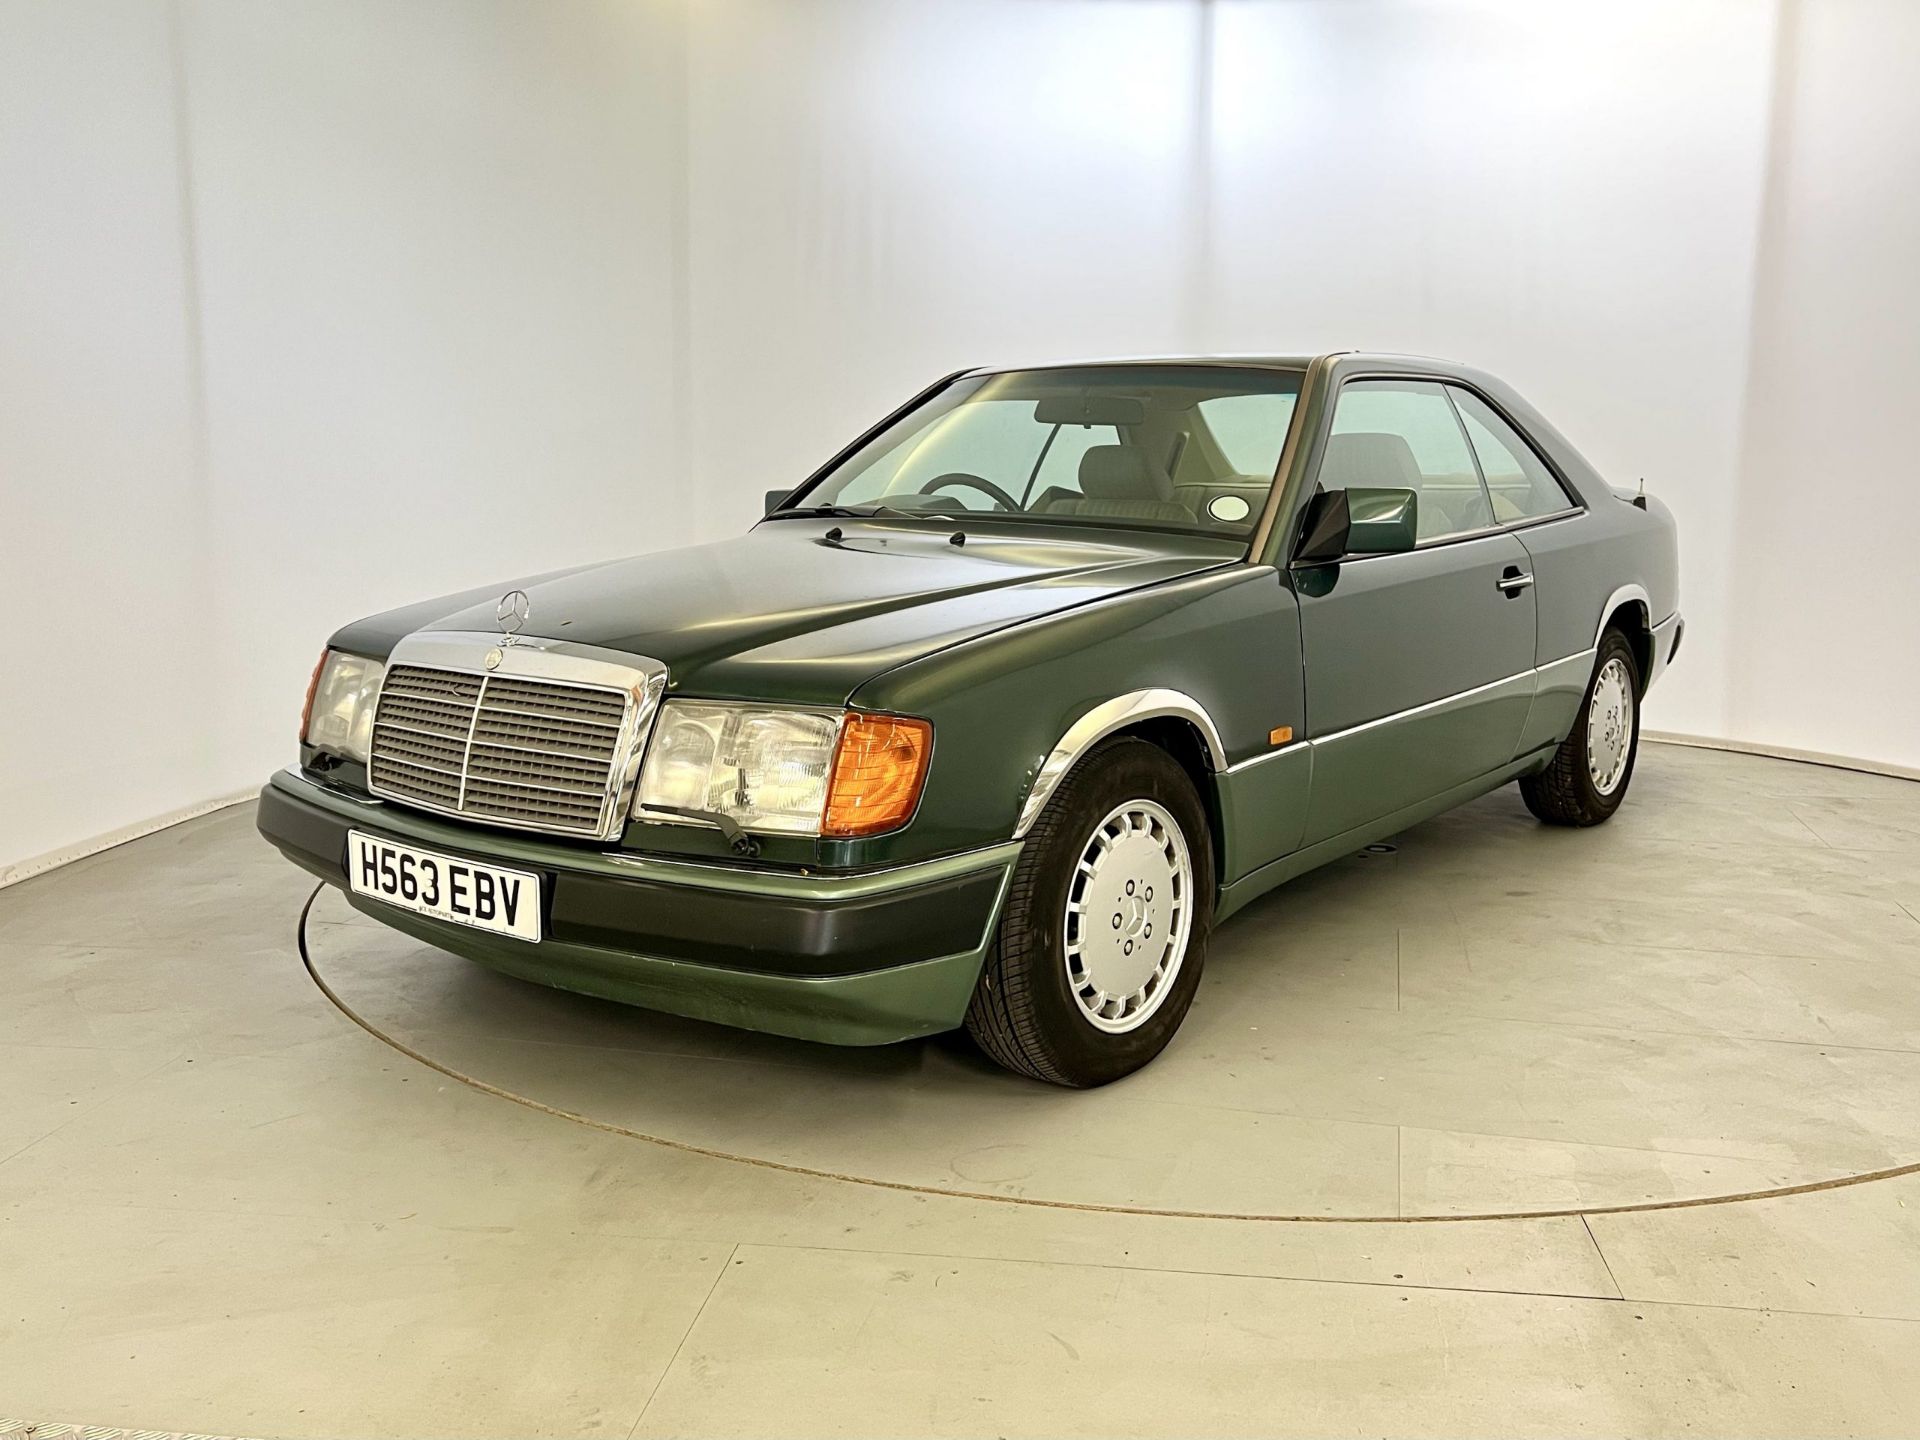 Mercedes 300CE - Image 3 of 30